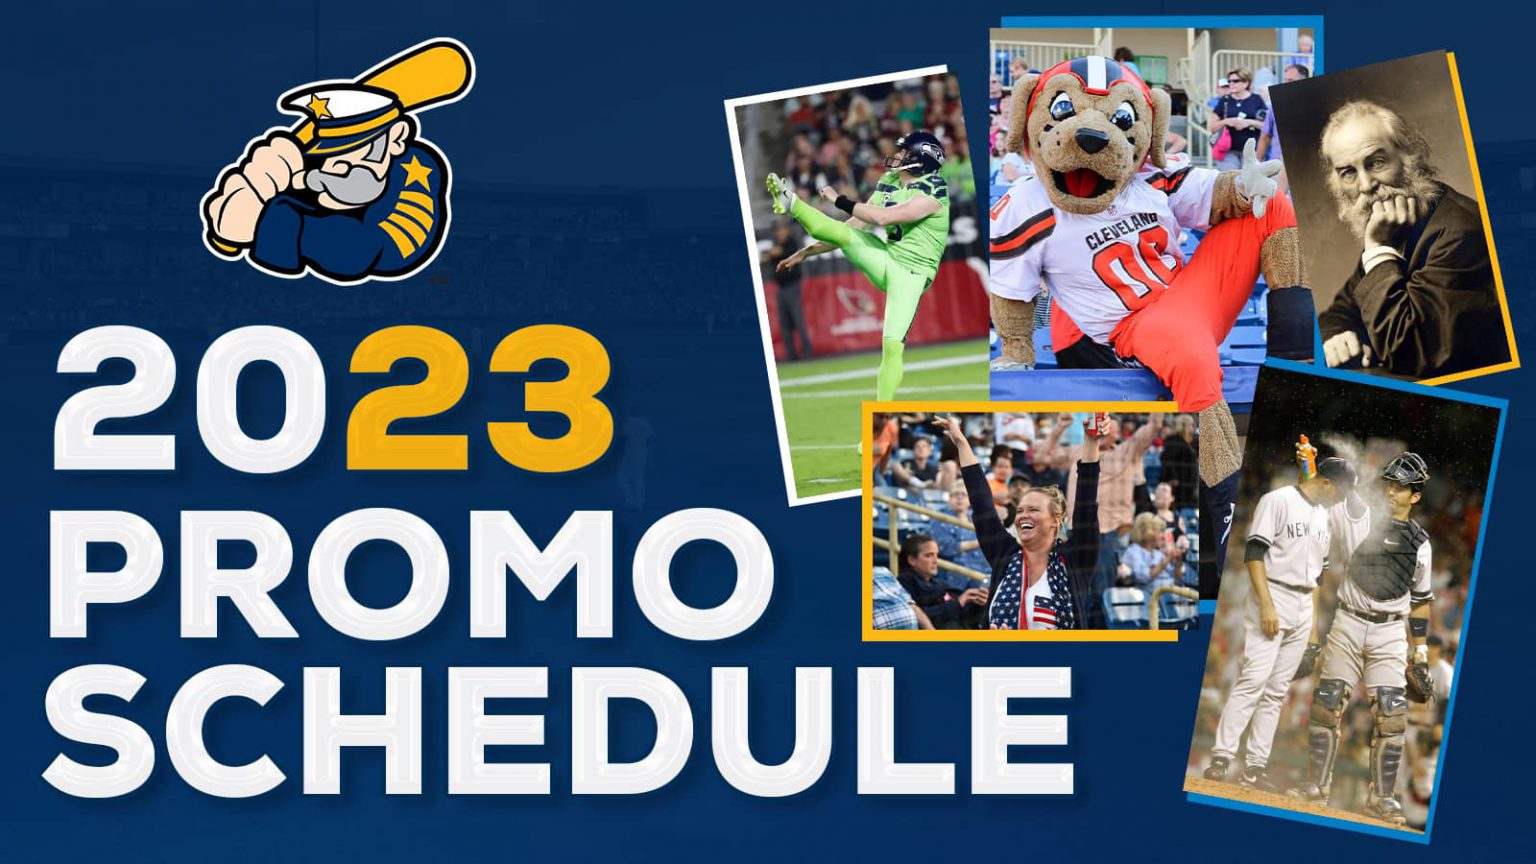 Lake County Captains Announce Promotional Schedule For 2023 Season